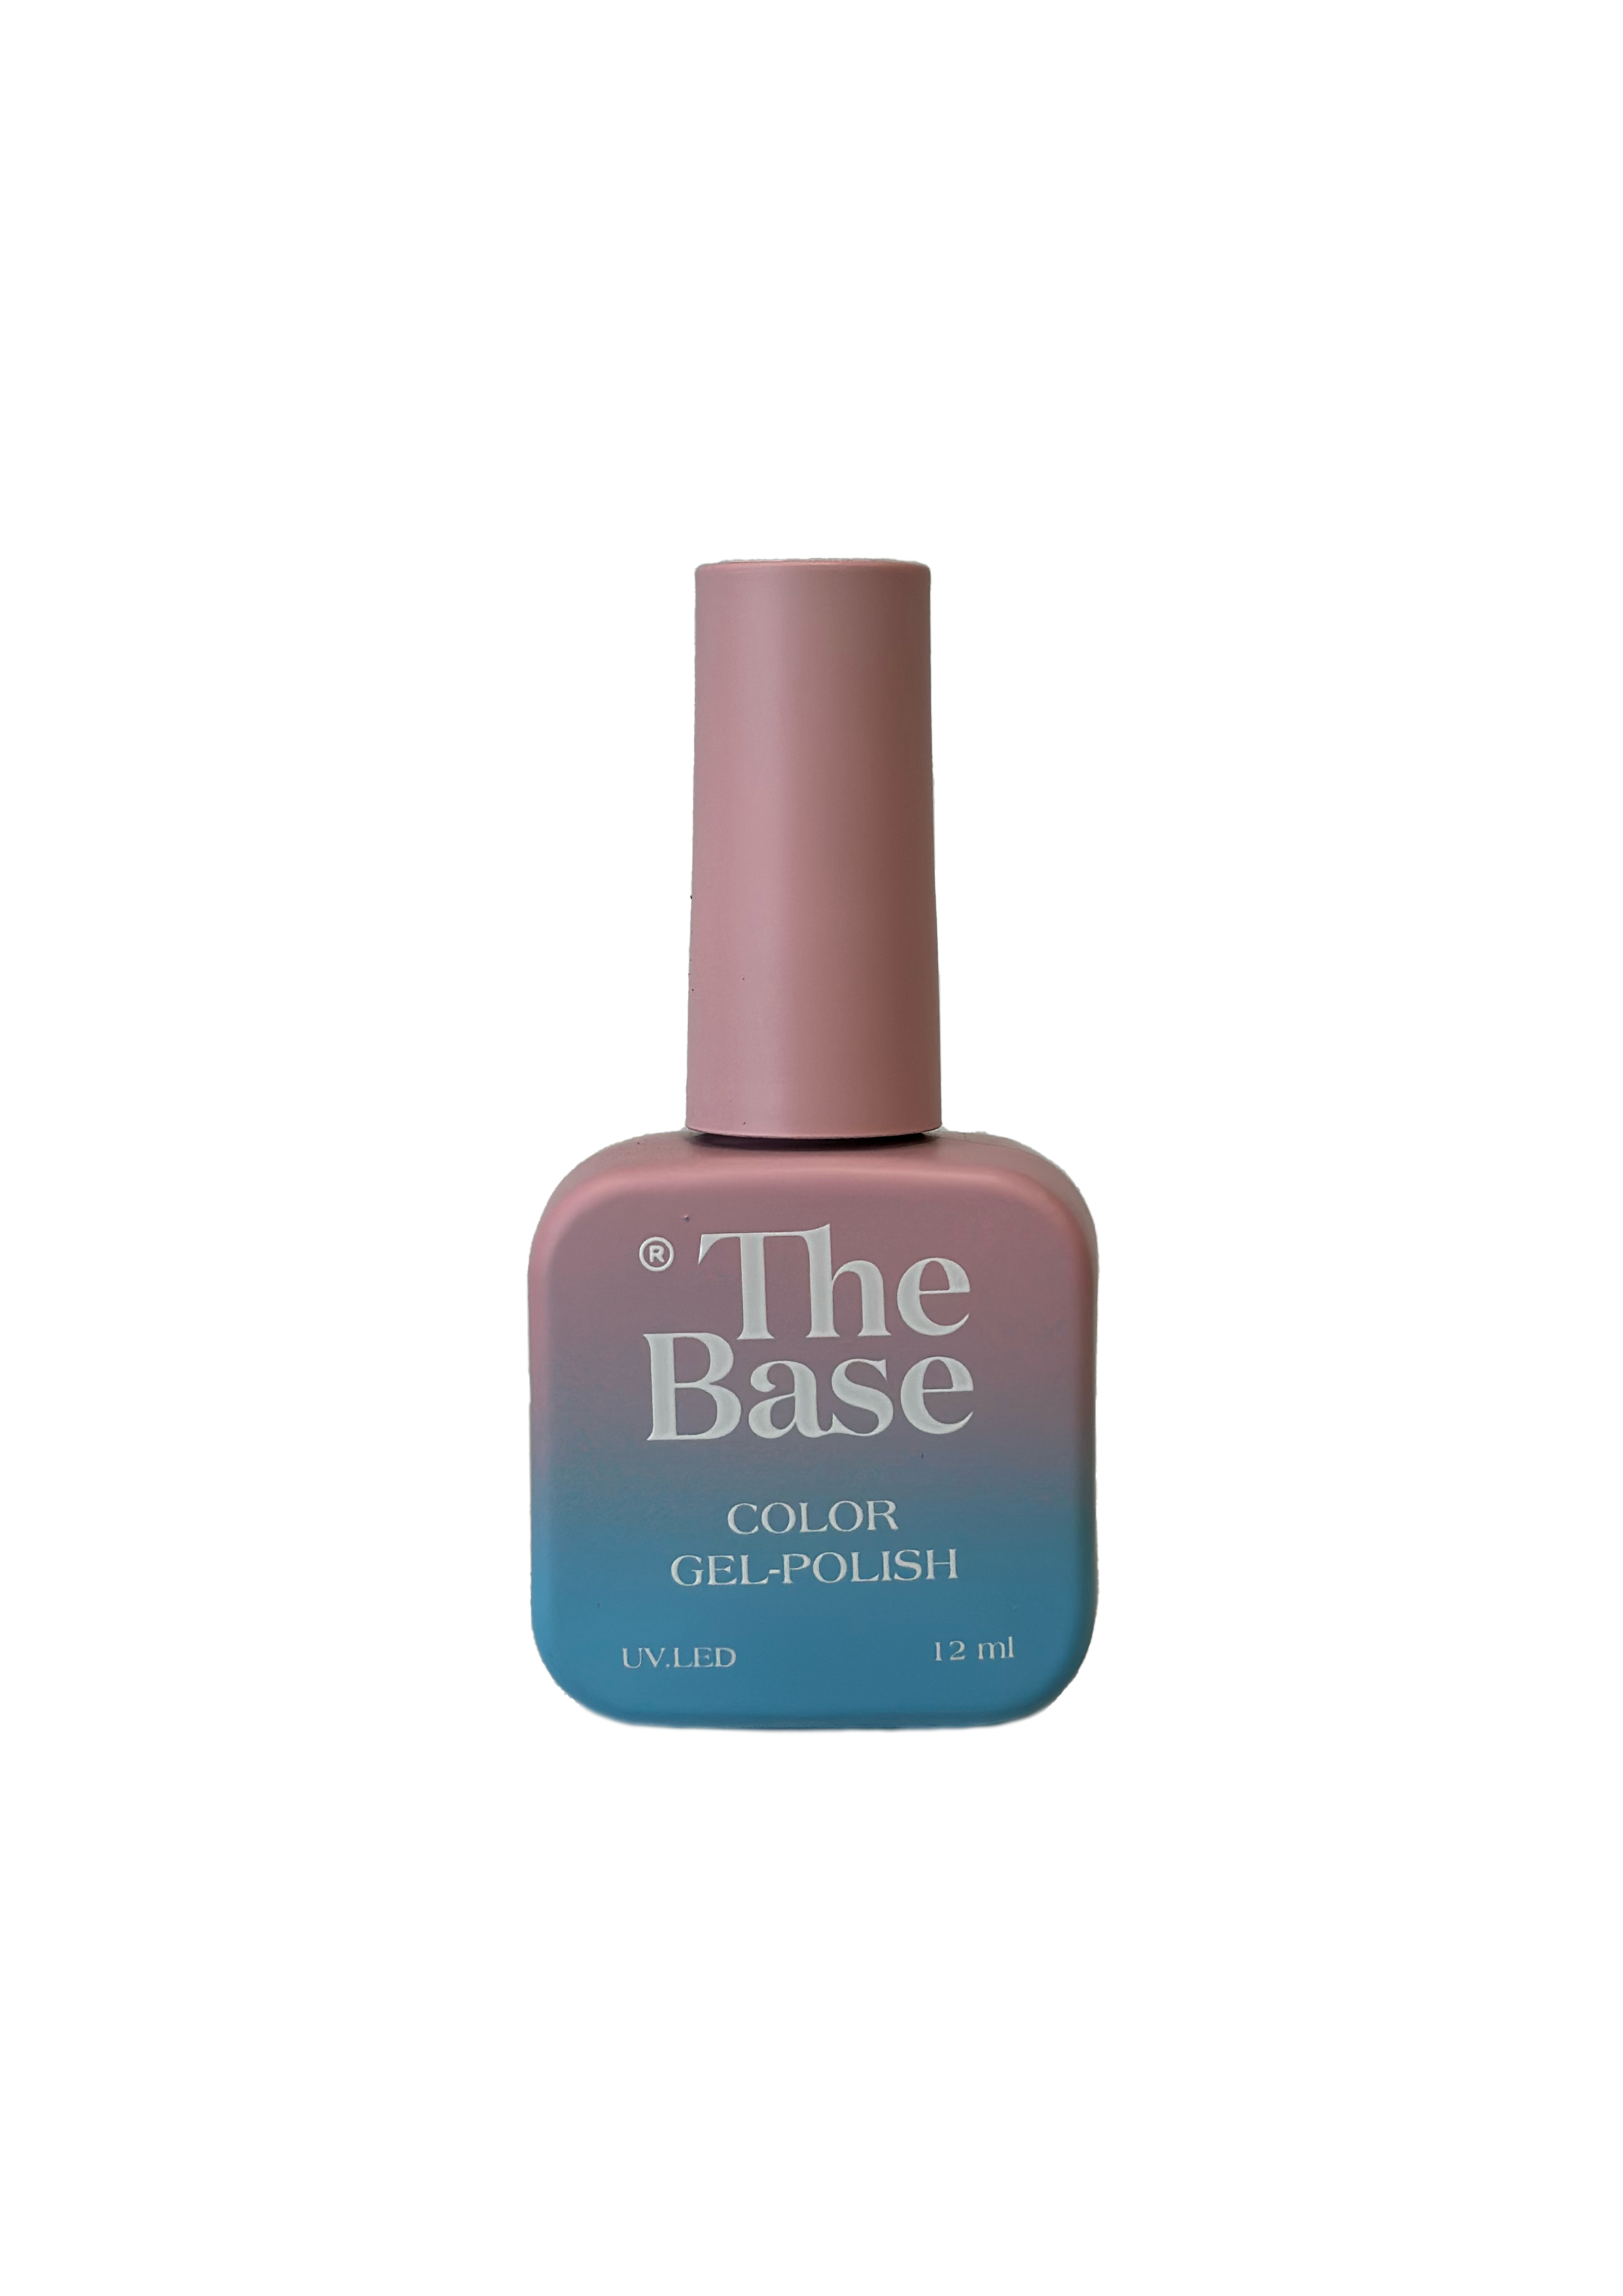 Vernis semi permanent The Base camouflage 2